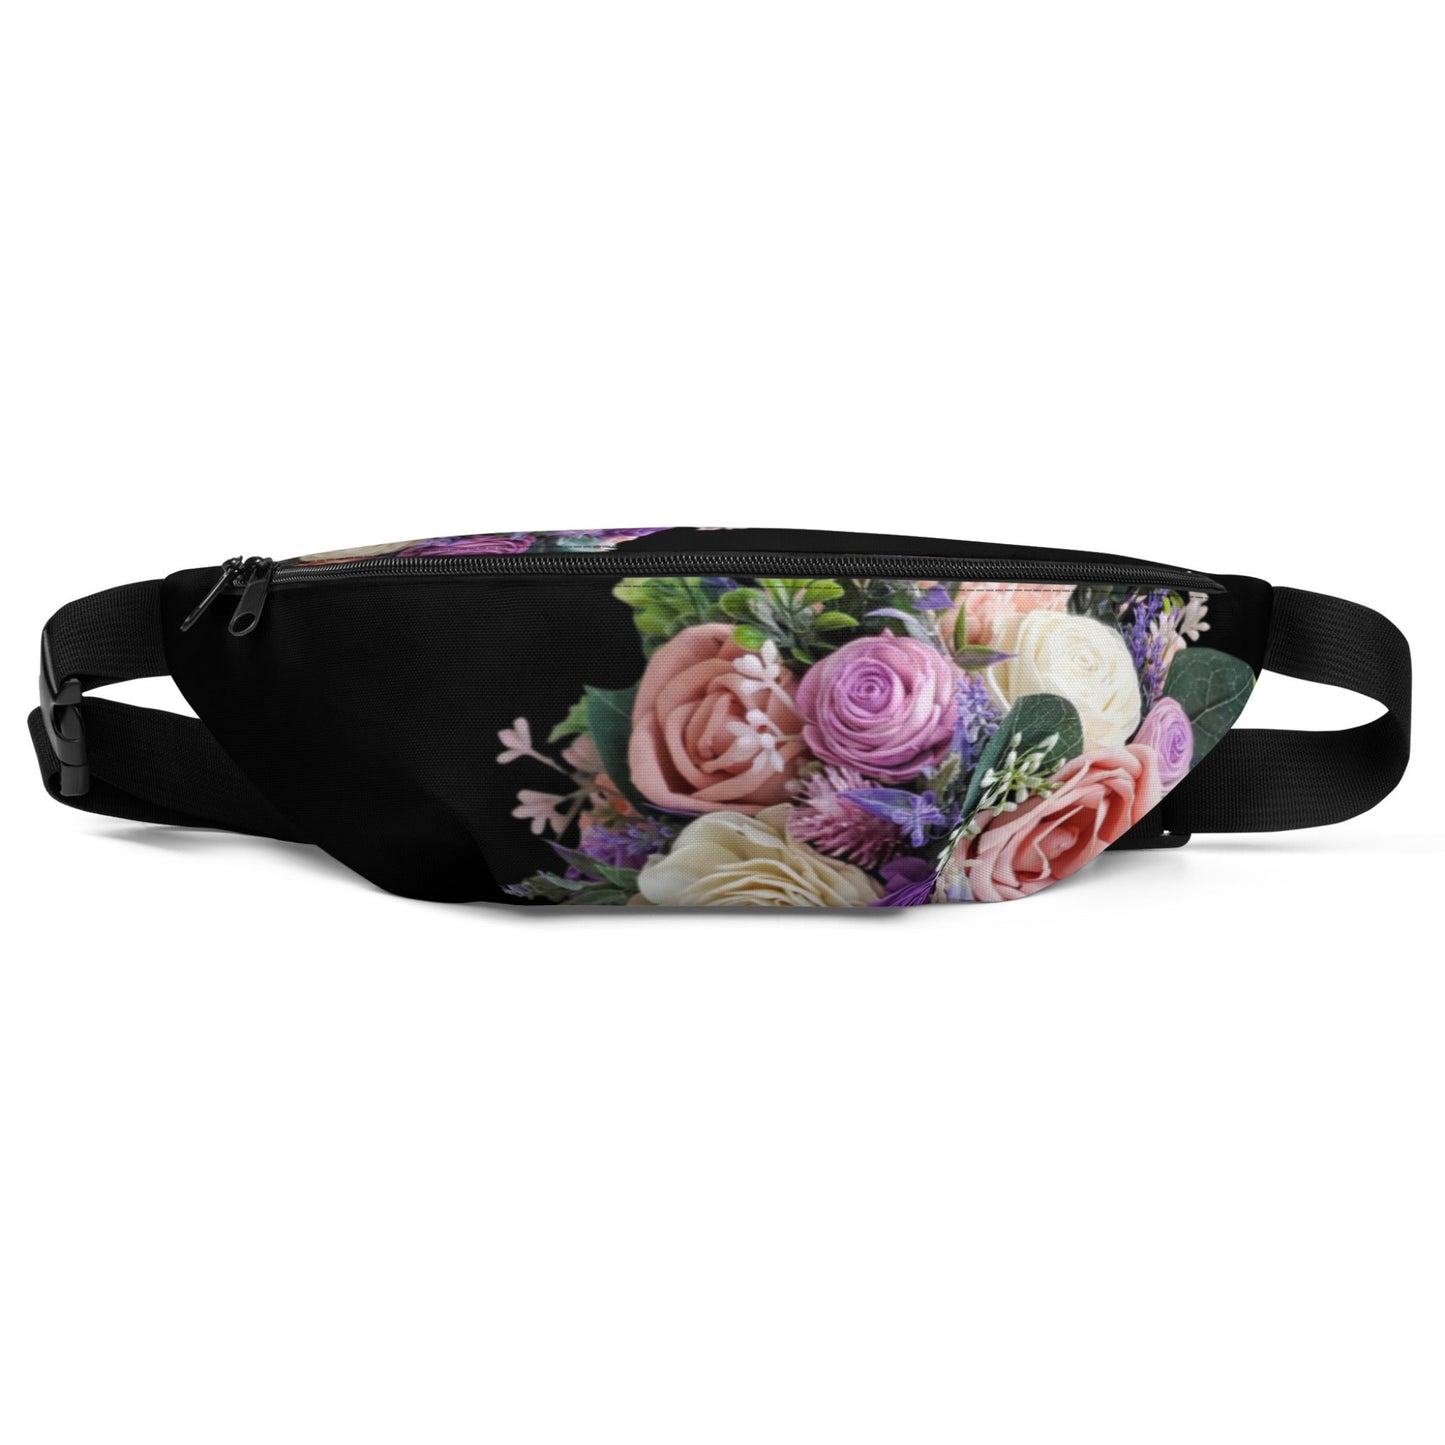 Black fanny pack with pink, purple. and ivory floral design. 